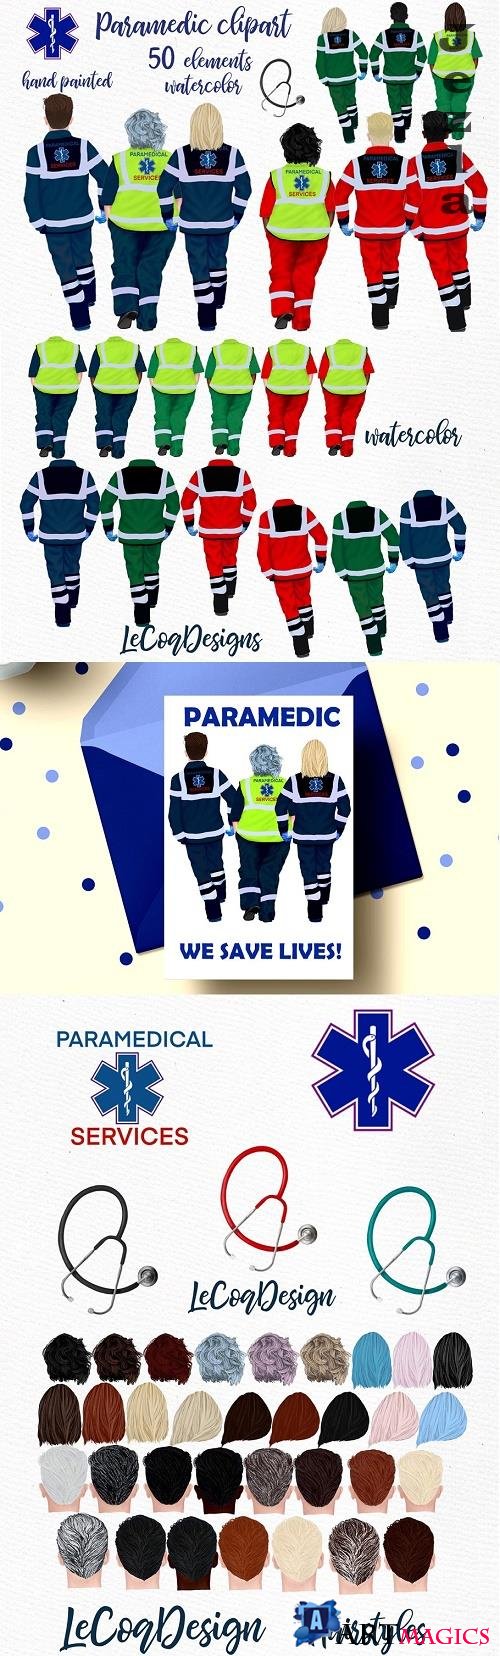 Paramedic clipart First Responders - 4806784